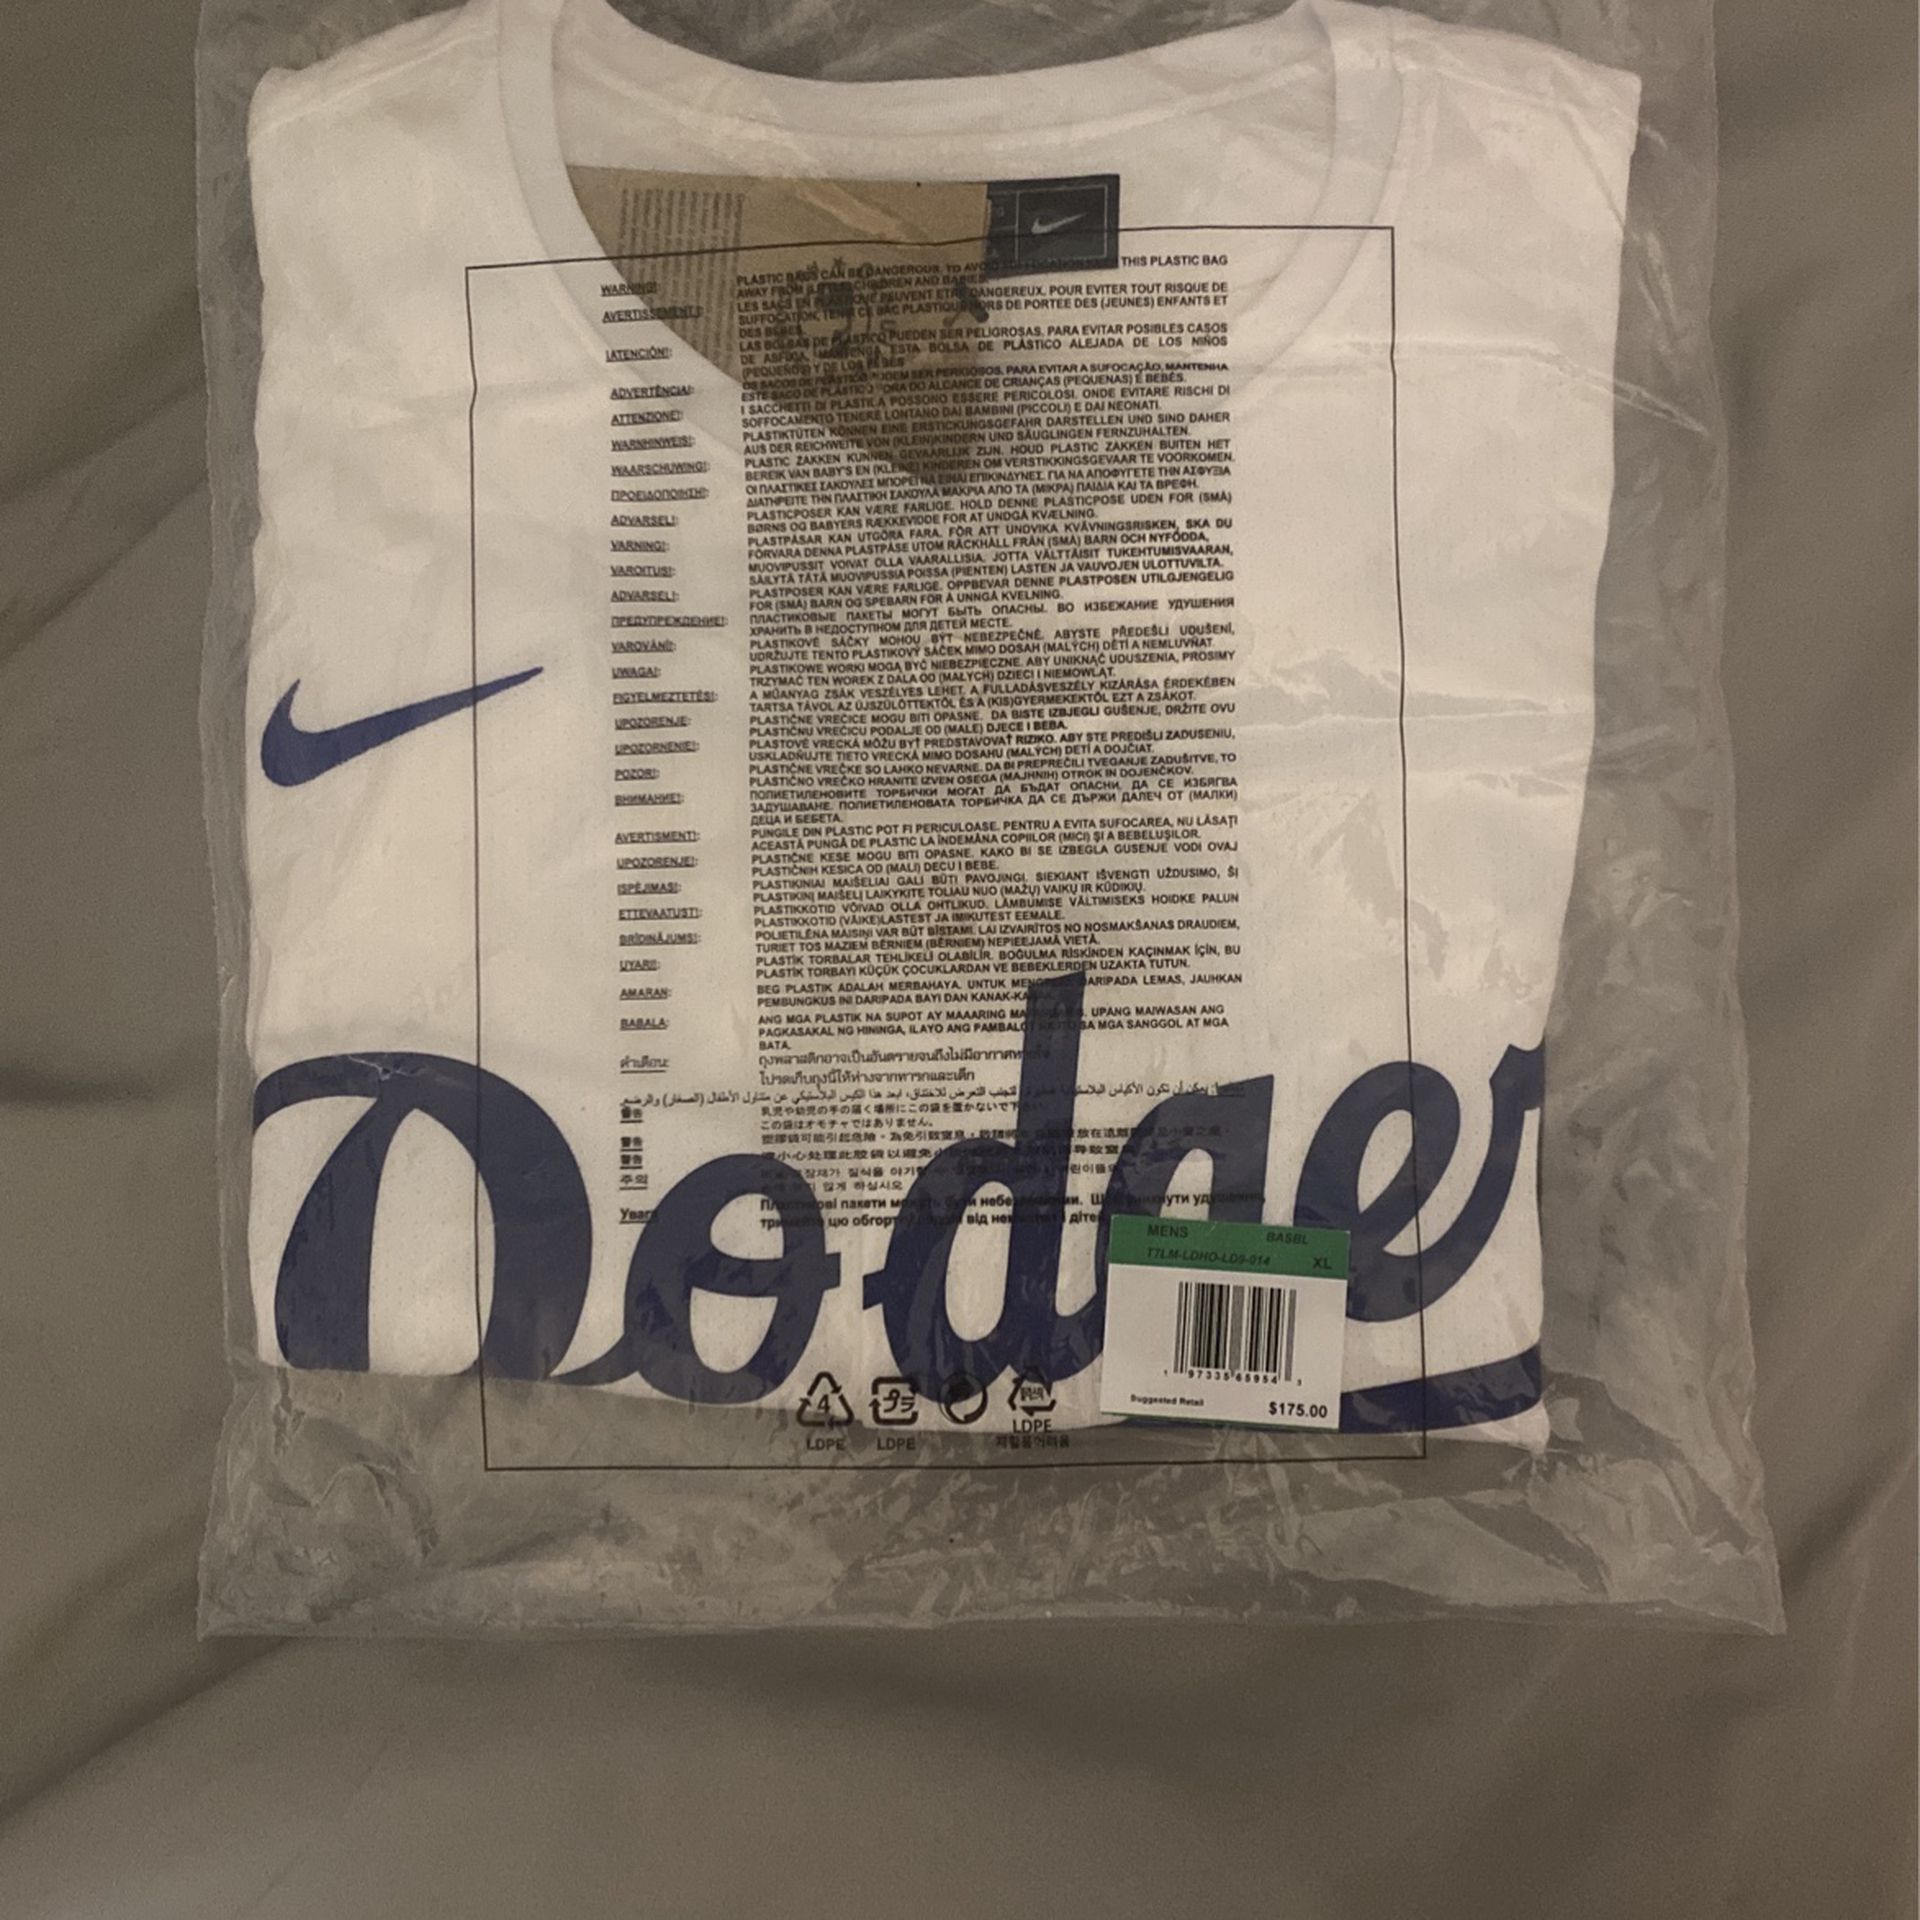 Dodgers Mookie Betts Men’s XL White Home Jersey Brand New Unopened